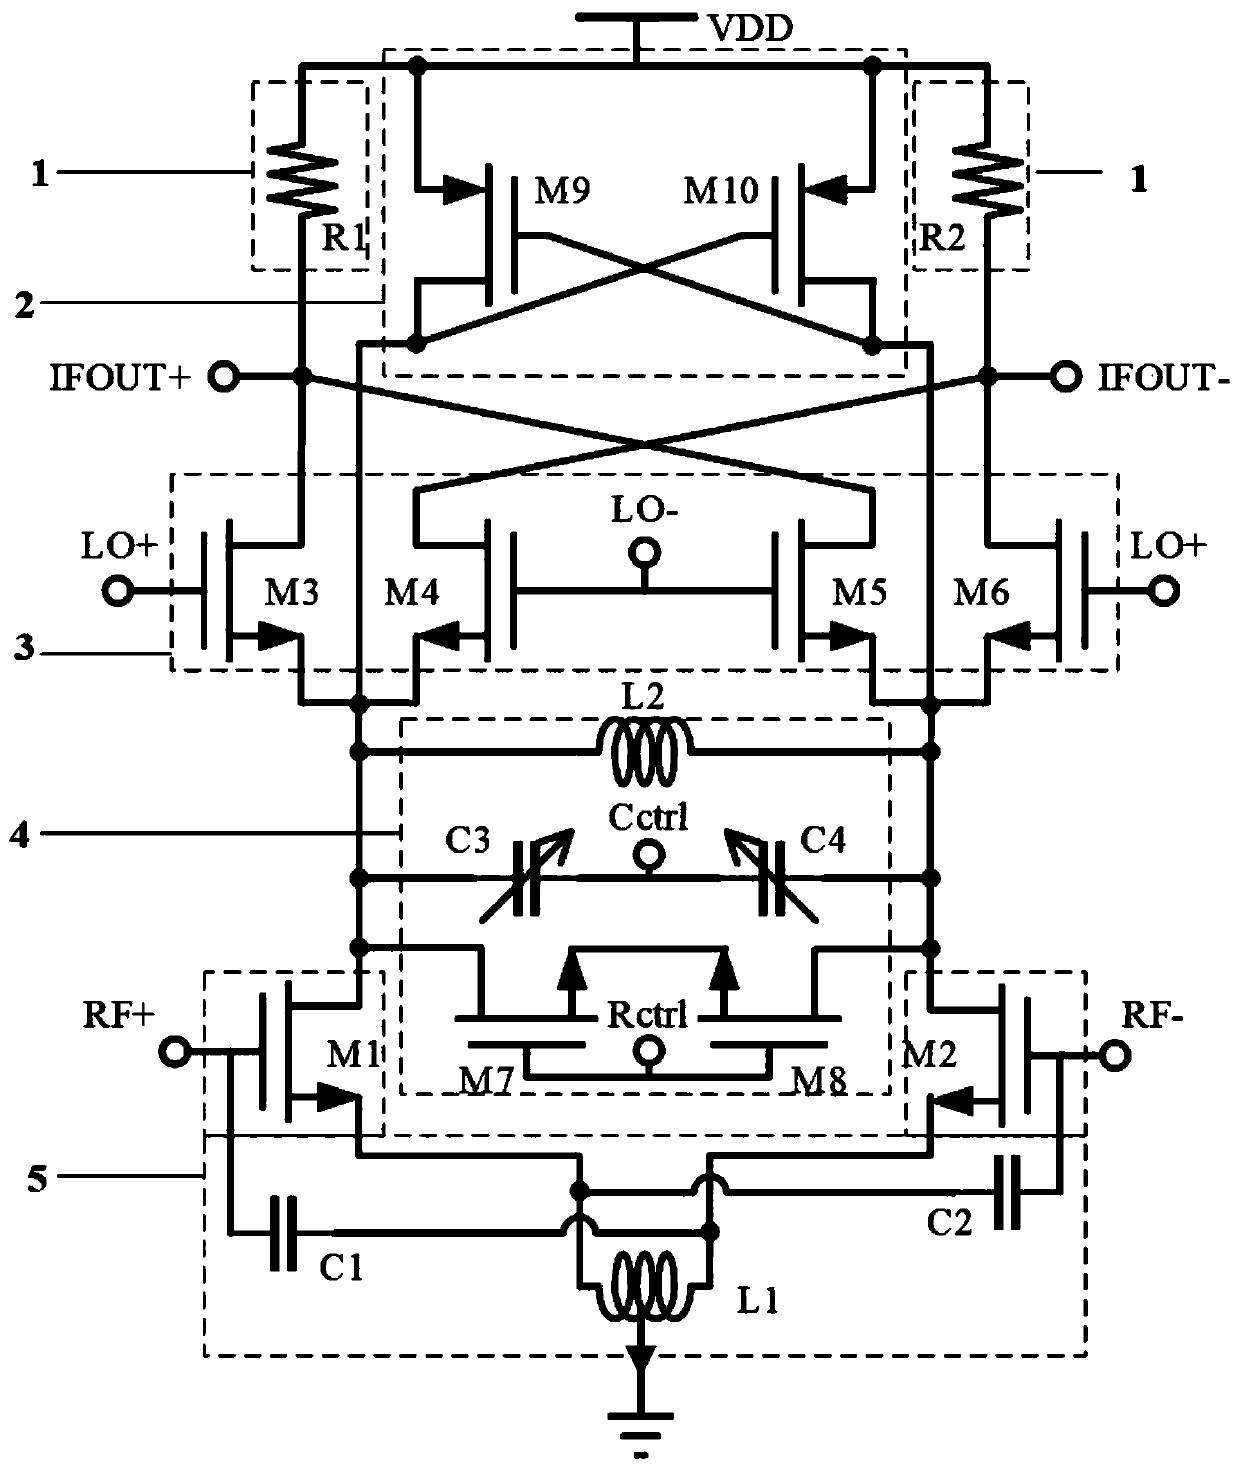 High-gain and low-noise mixer integrated circuit